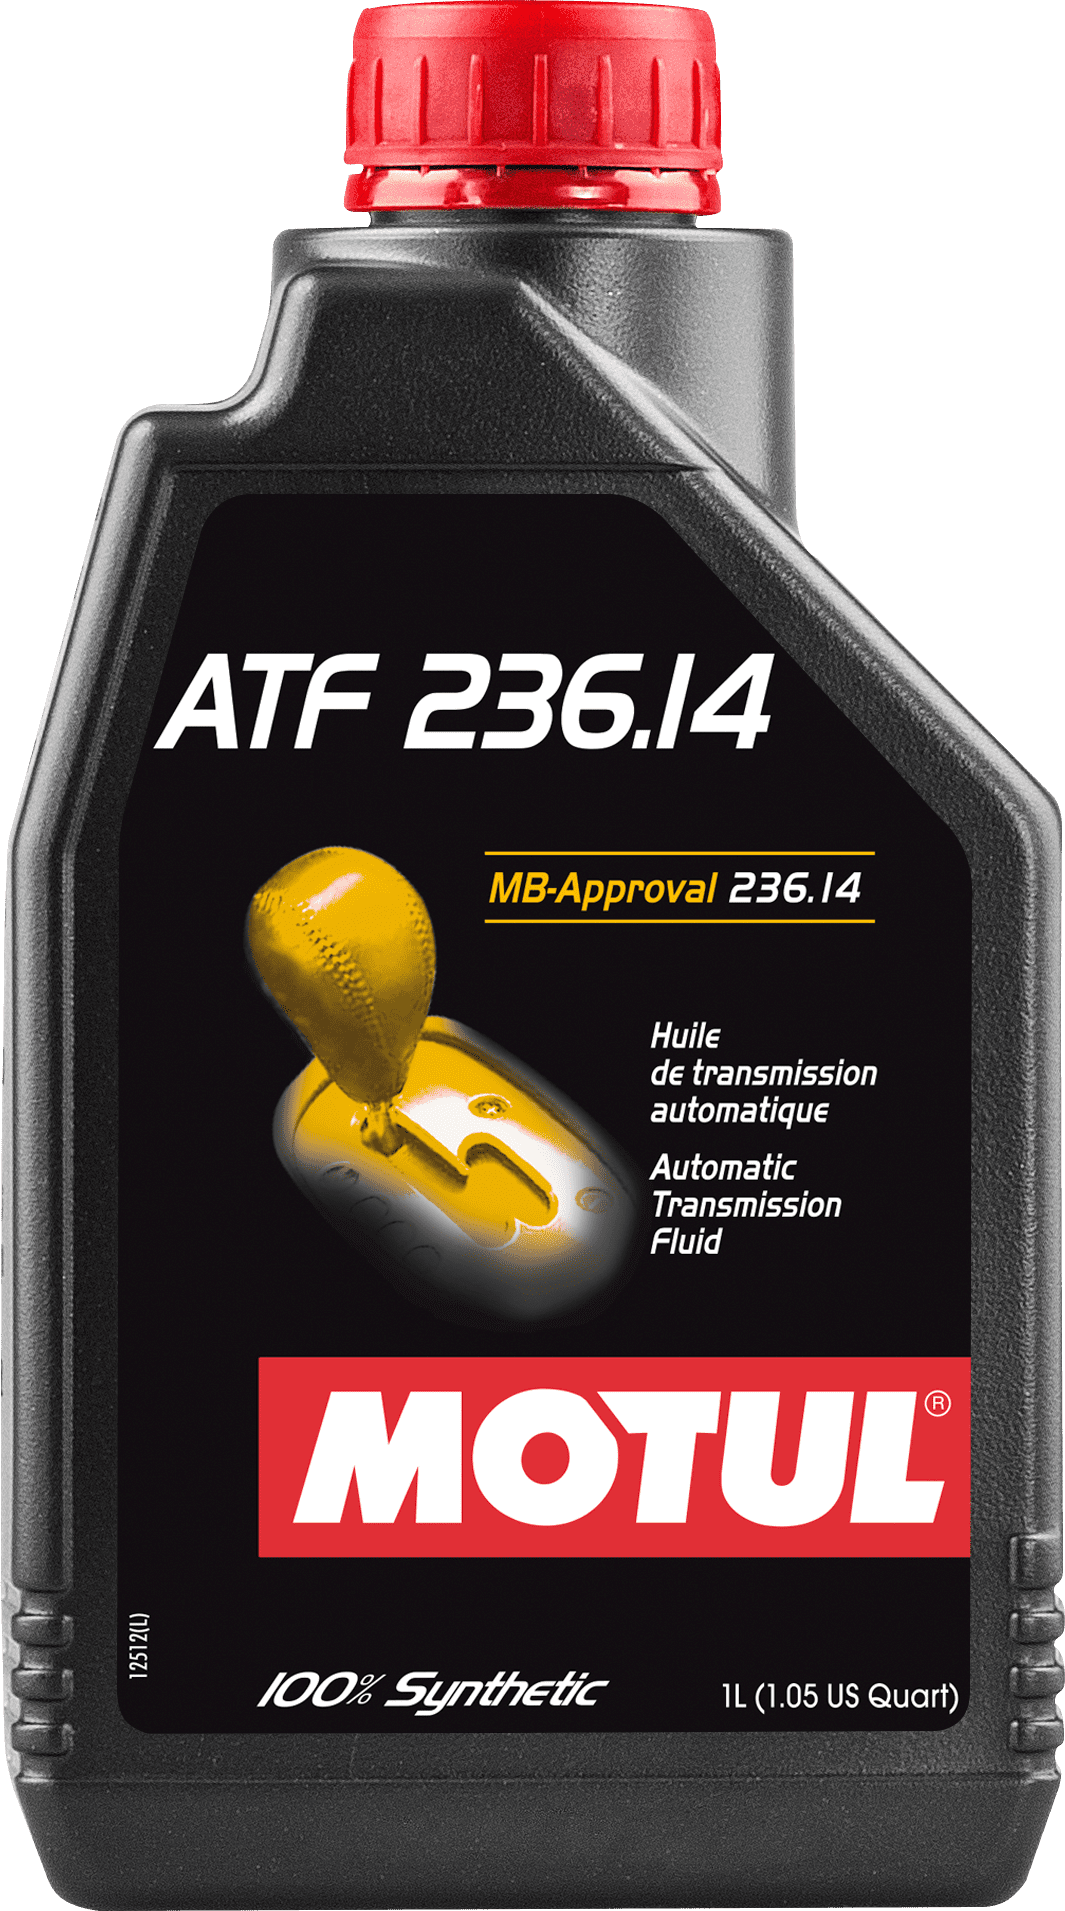 105773-1 100% Synthetic transmission fluid.